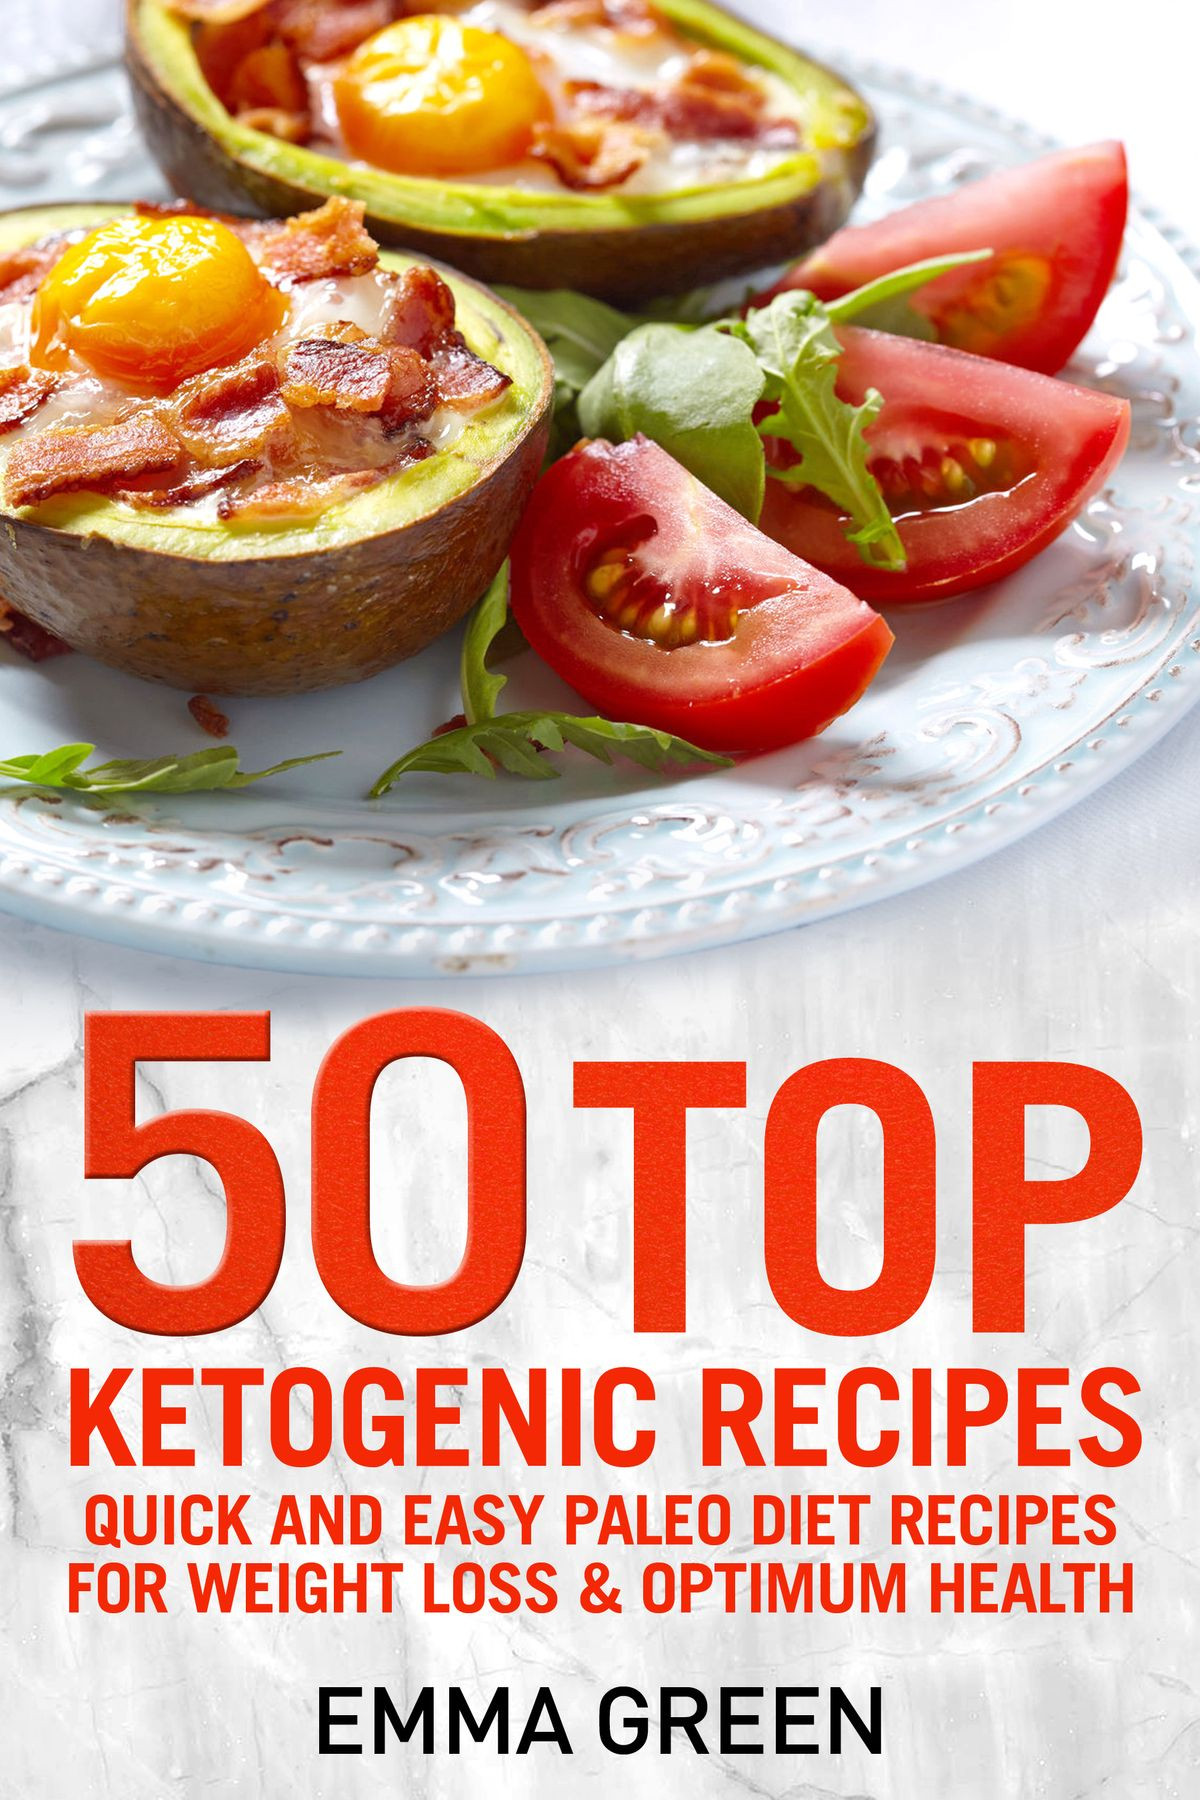 Quick Weight Loss Diet Recipes
 50 Top Ketogenic Recipes Quick and Easy Keto Diet Recipes